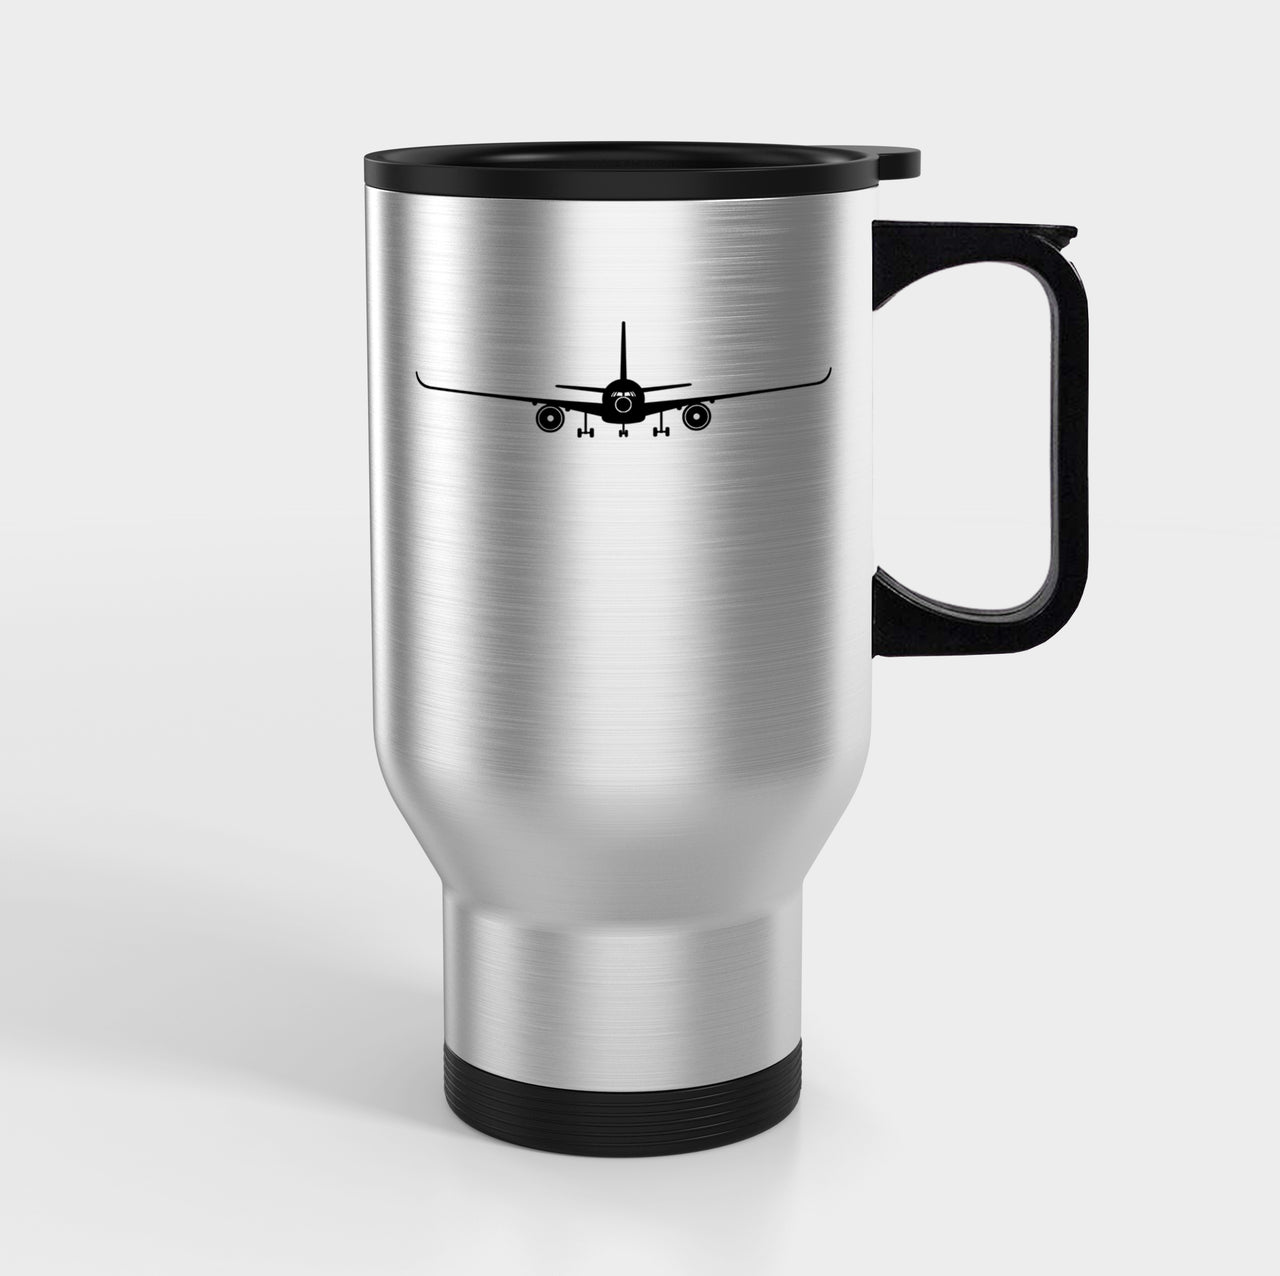 Airbus A350 Silhouette Designed Travel Mugs (With Holder)